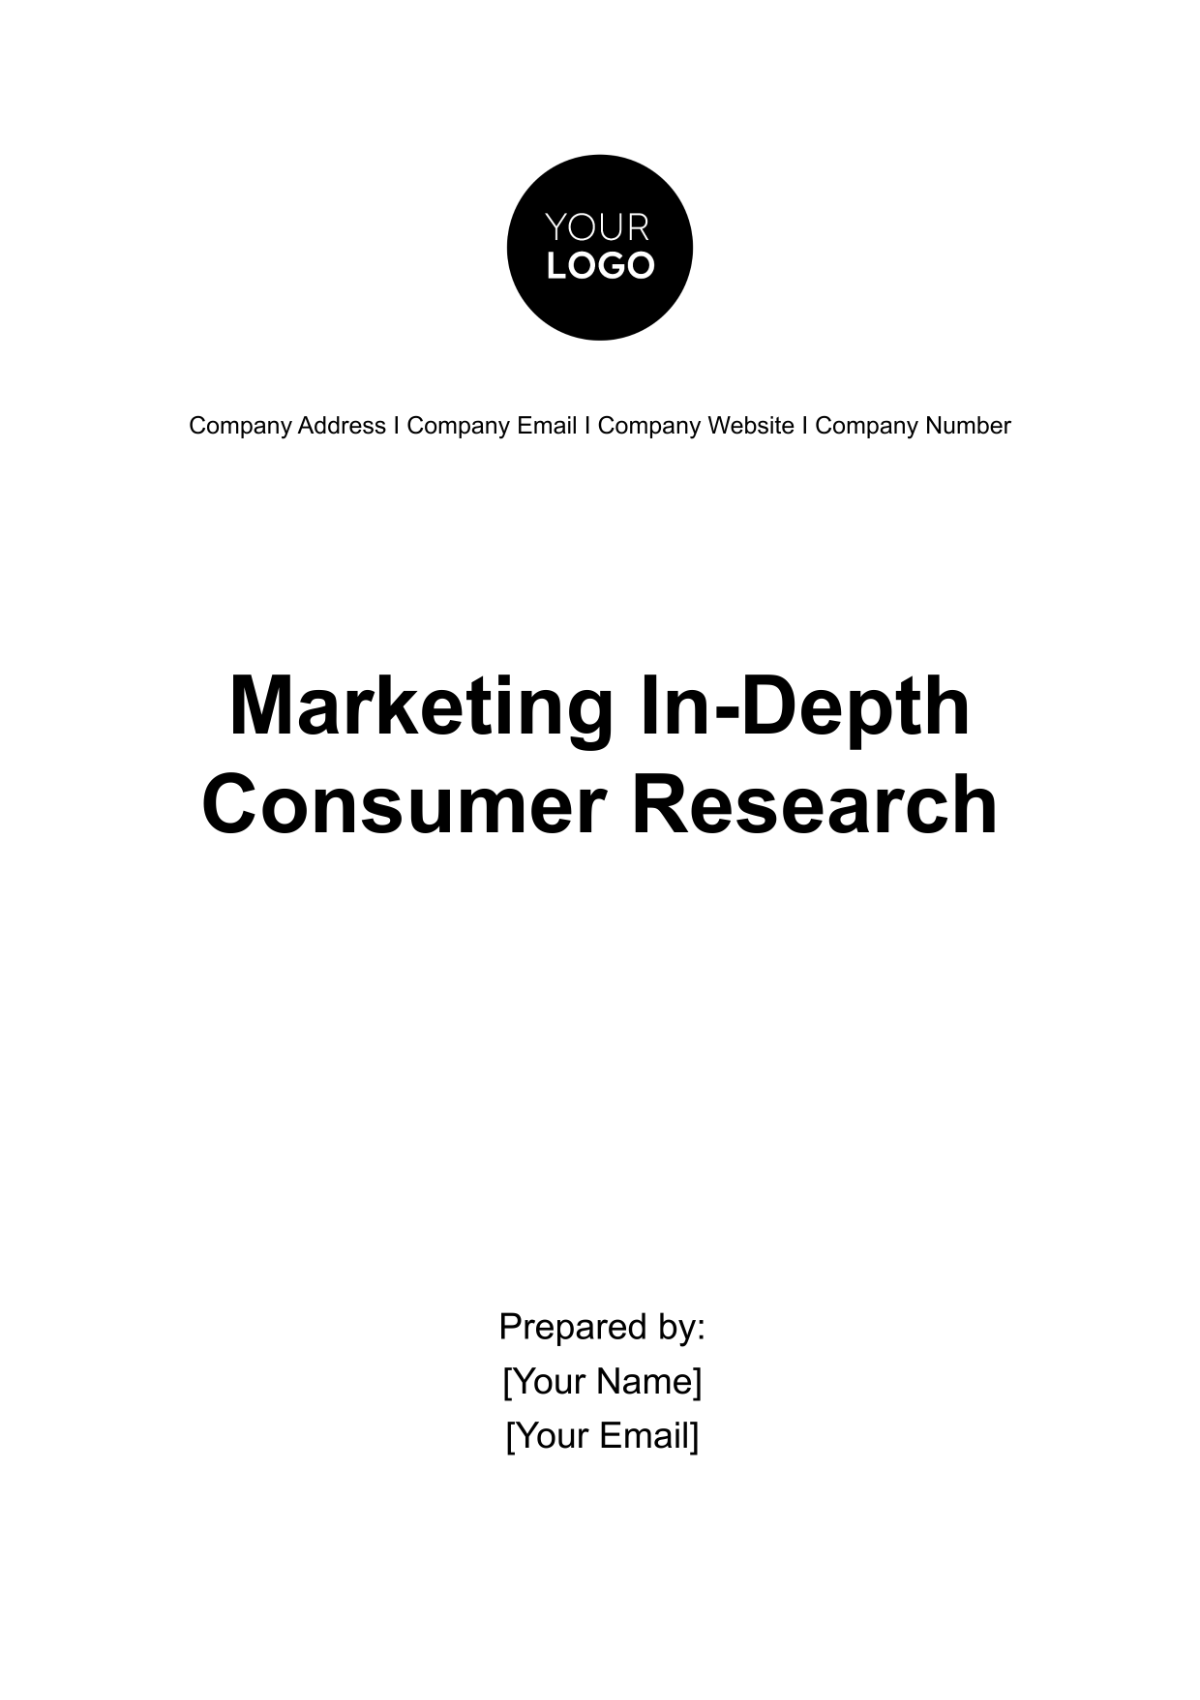 Marketing In-depth Consumer Research Template